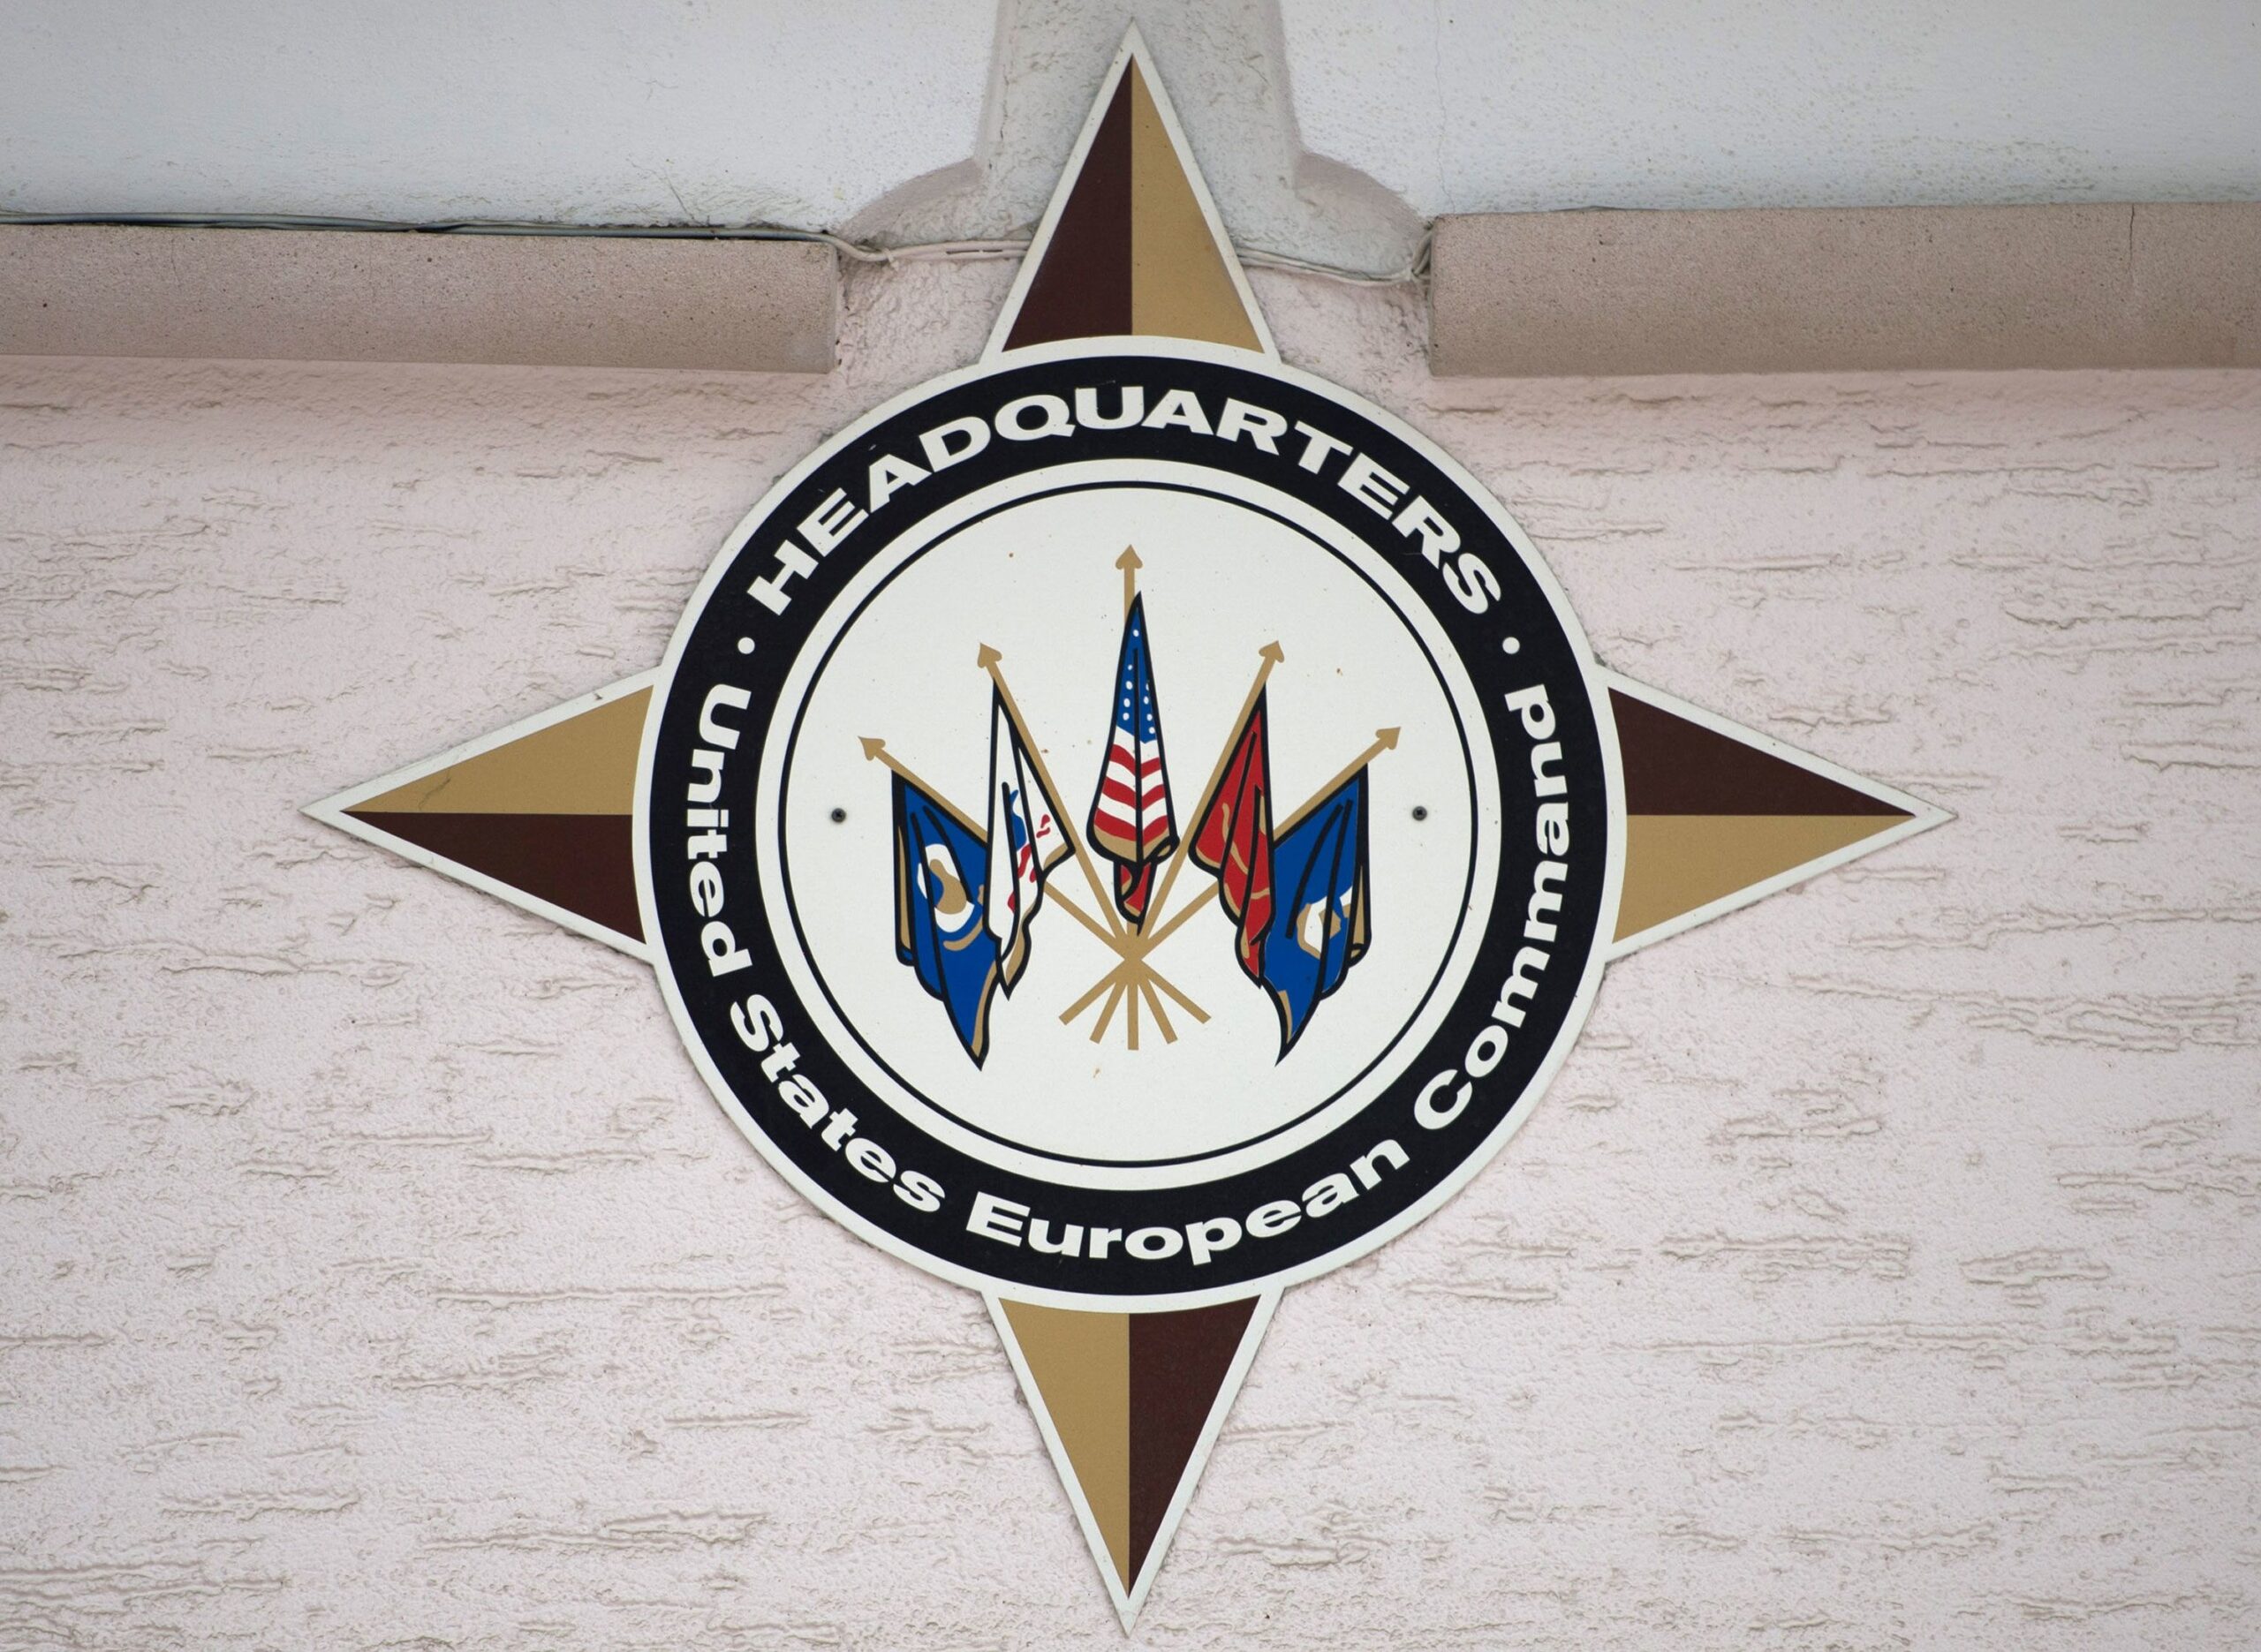 The logo of the US European Command is seen at the headquarters in Stuttgart, Germany.
(Marijan Mur...